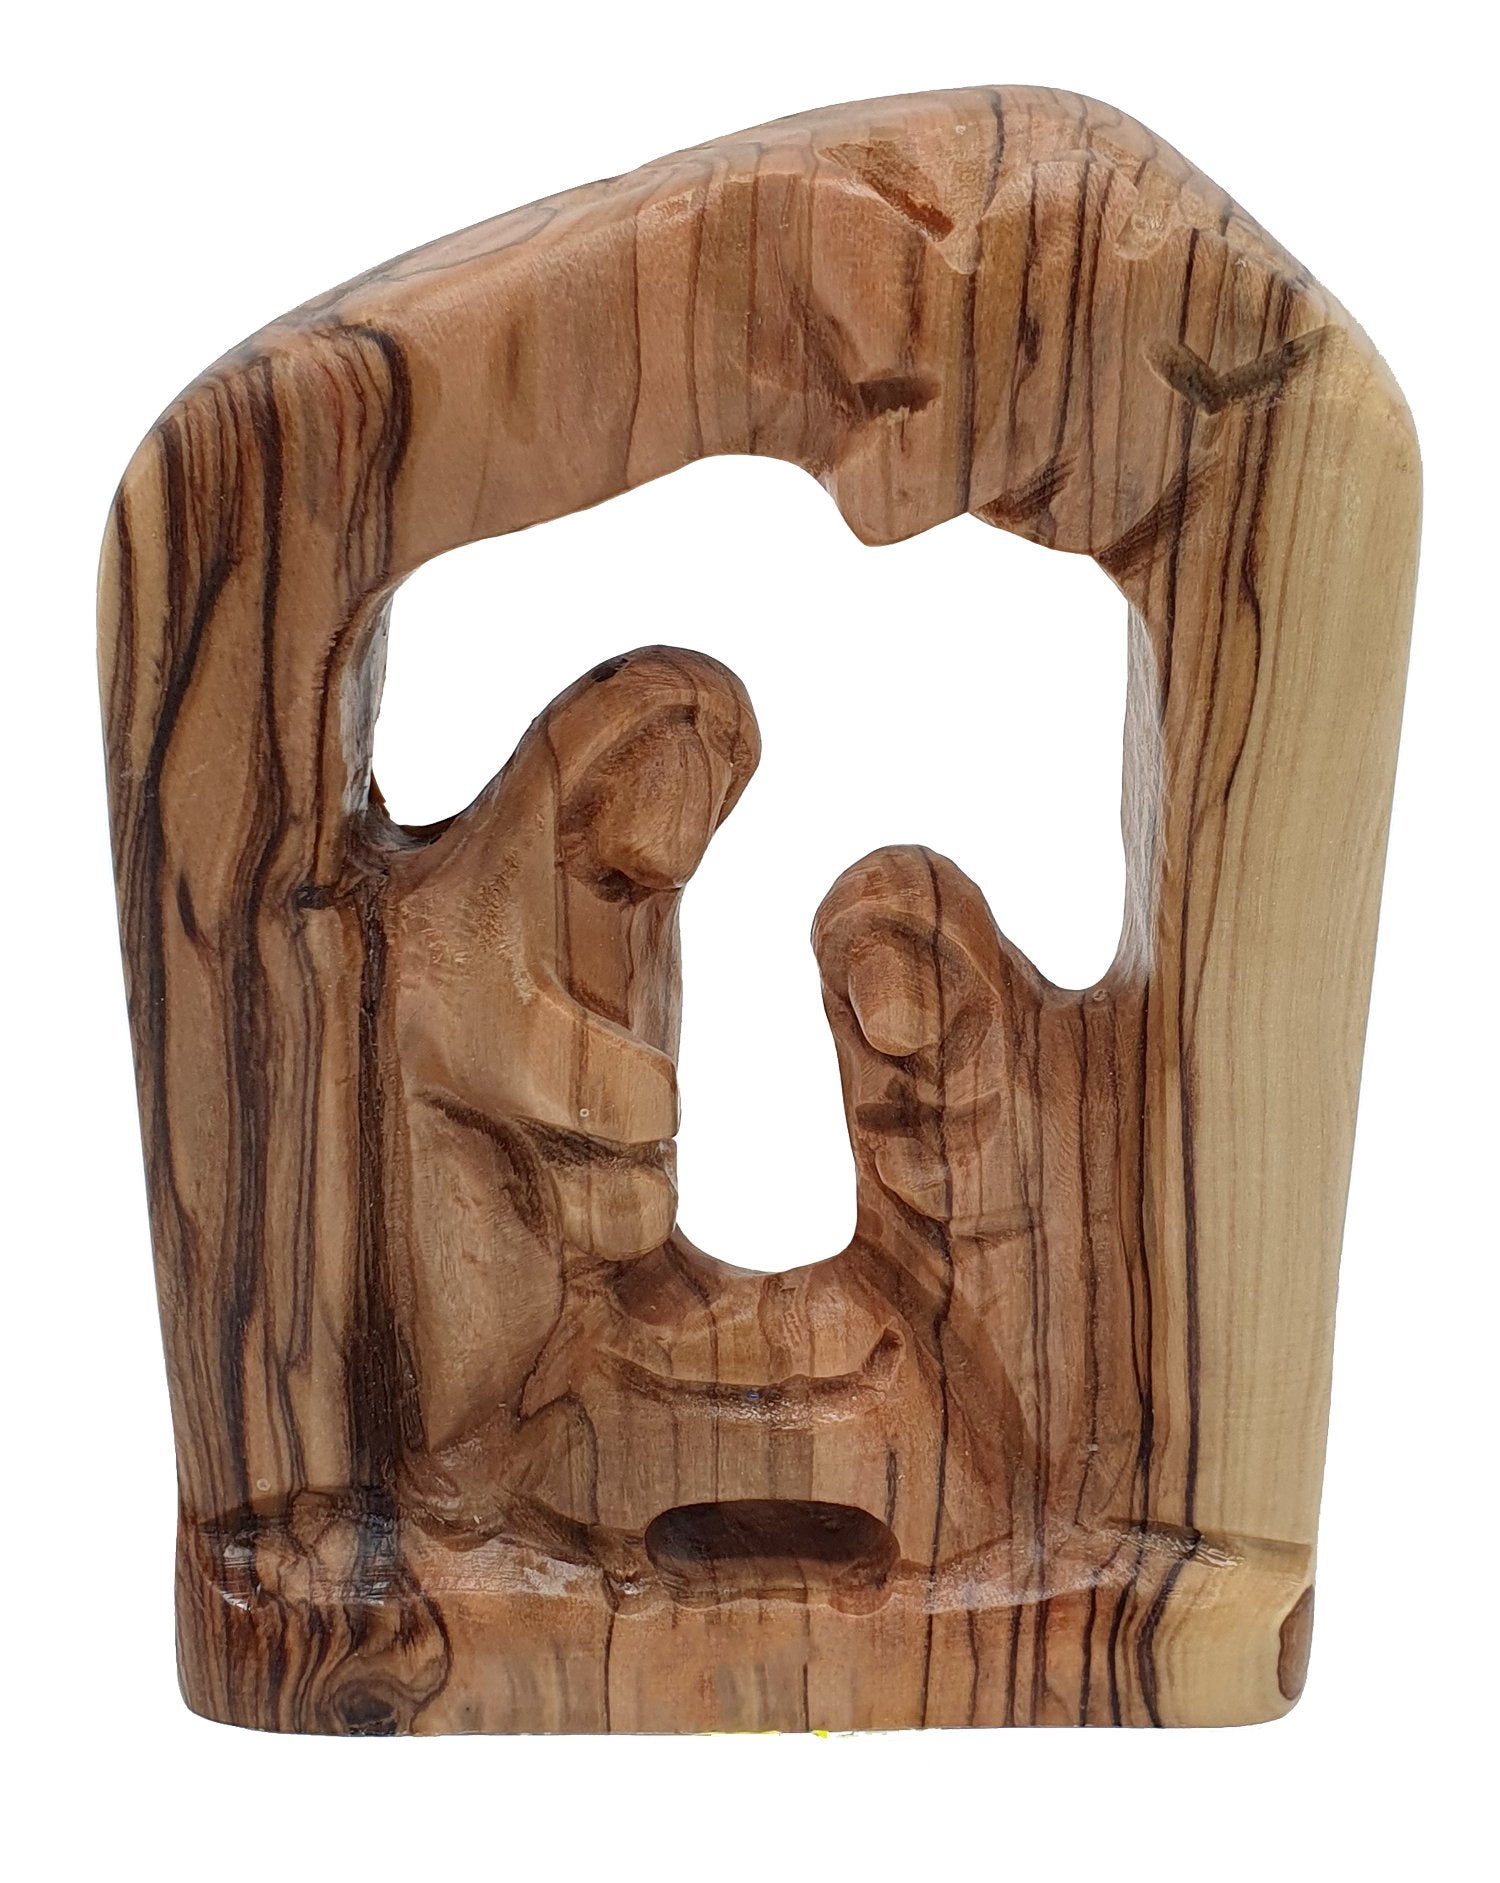 Holy Family Wooden Figurine of Nativity Set | Olive Wood Holy Family Statue Made in the Holy Land | Religious Nativity Scene Gift - Zuluf